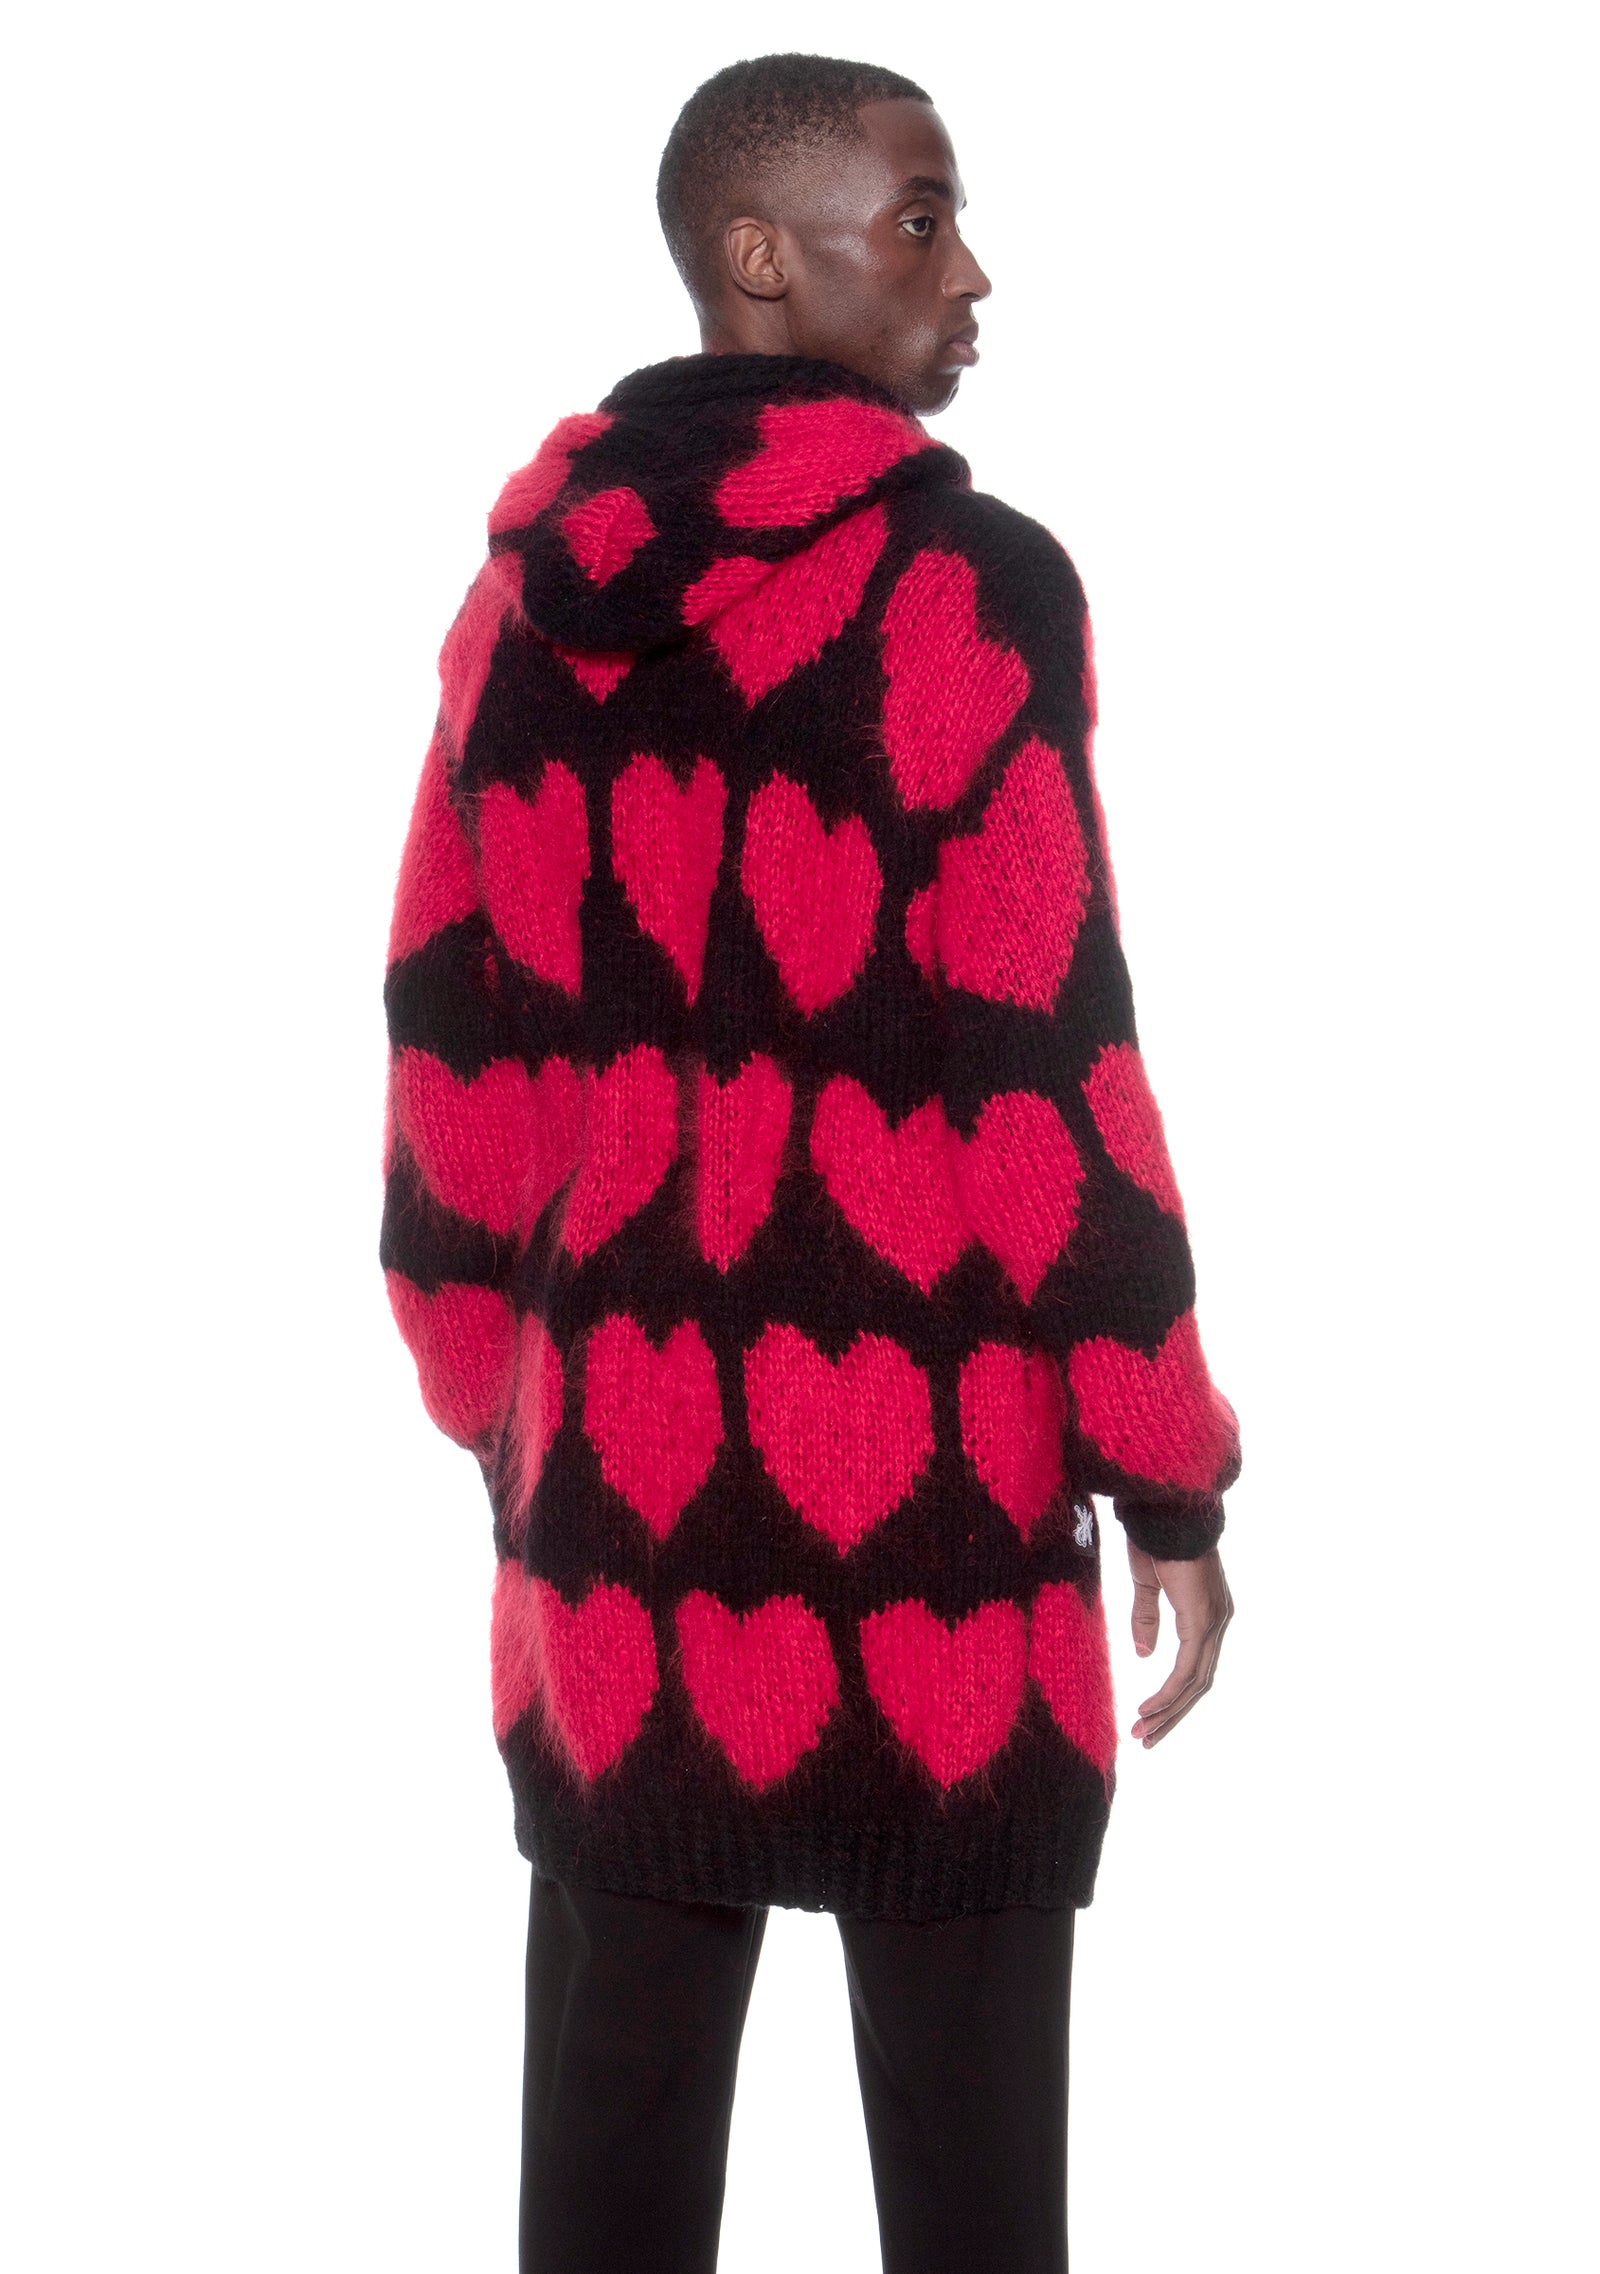 Sweater Nr. 49 - Heartless Red